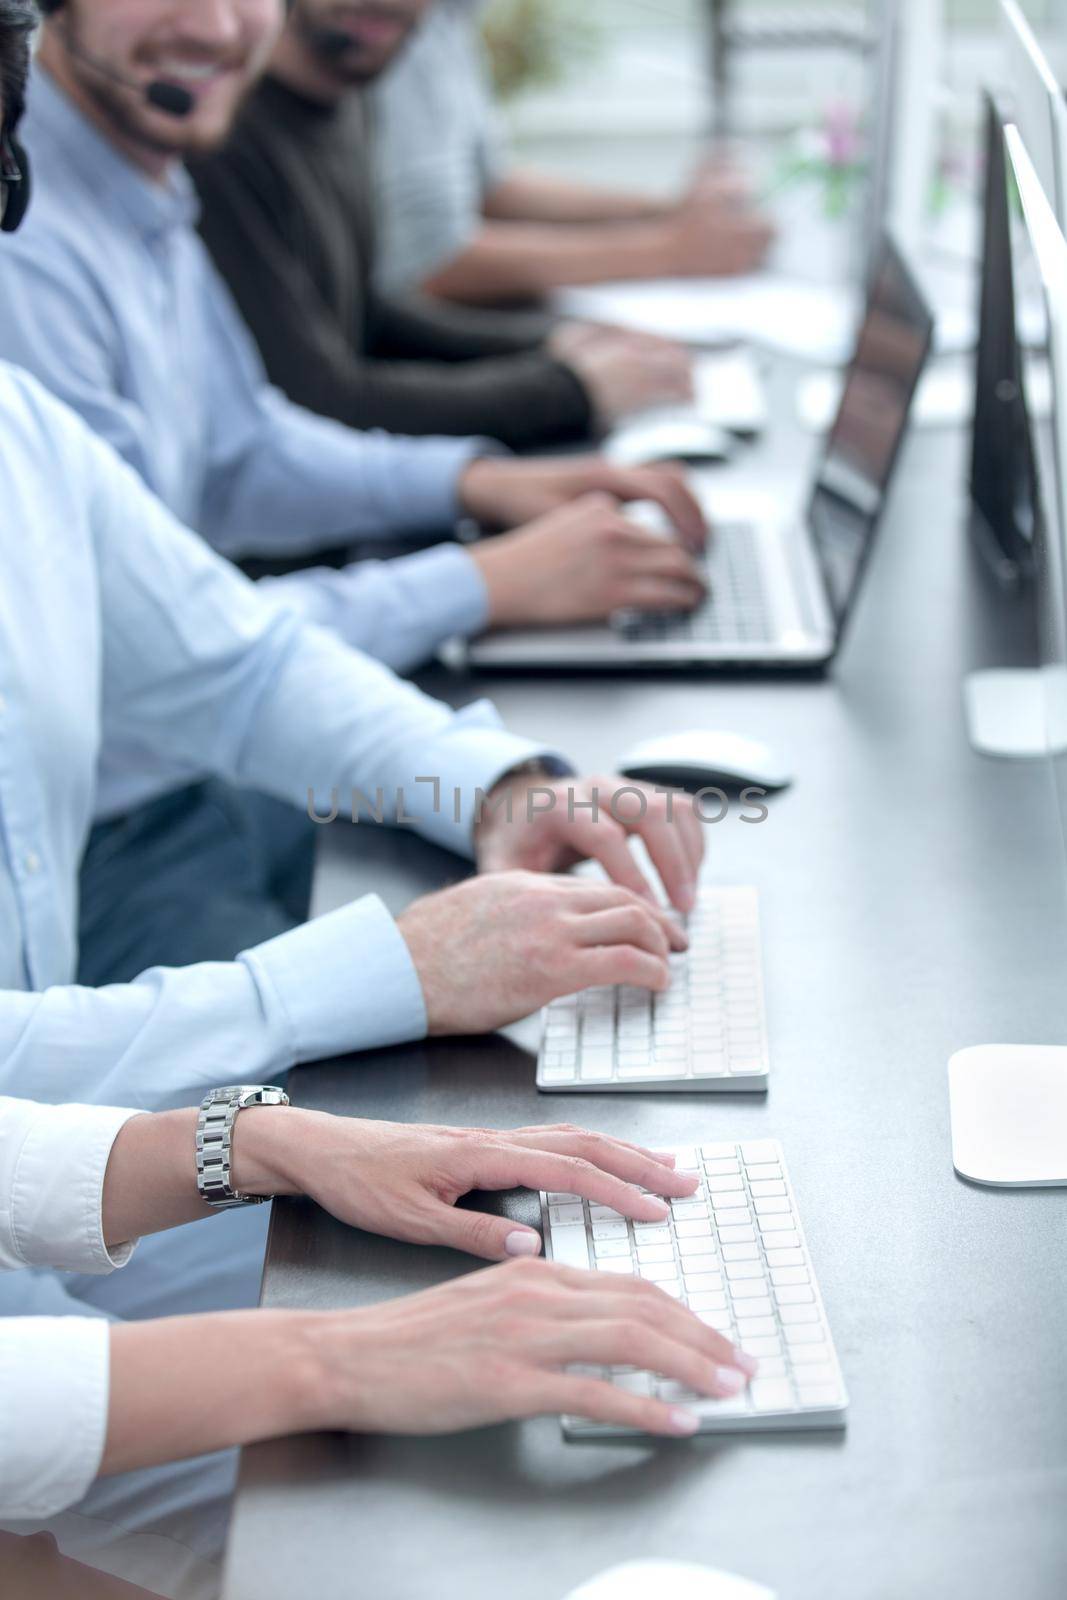 background image of a business team using computers.photo with copy space